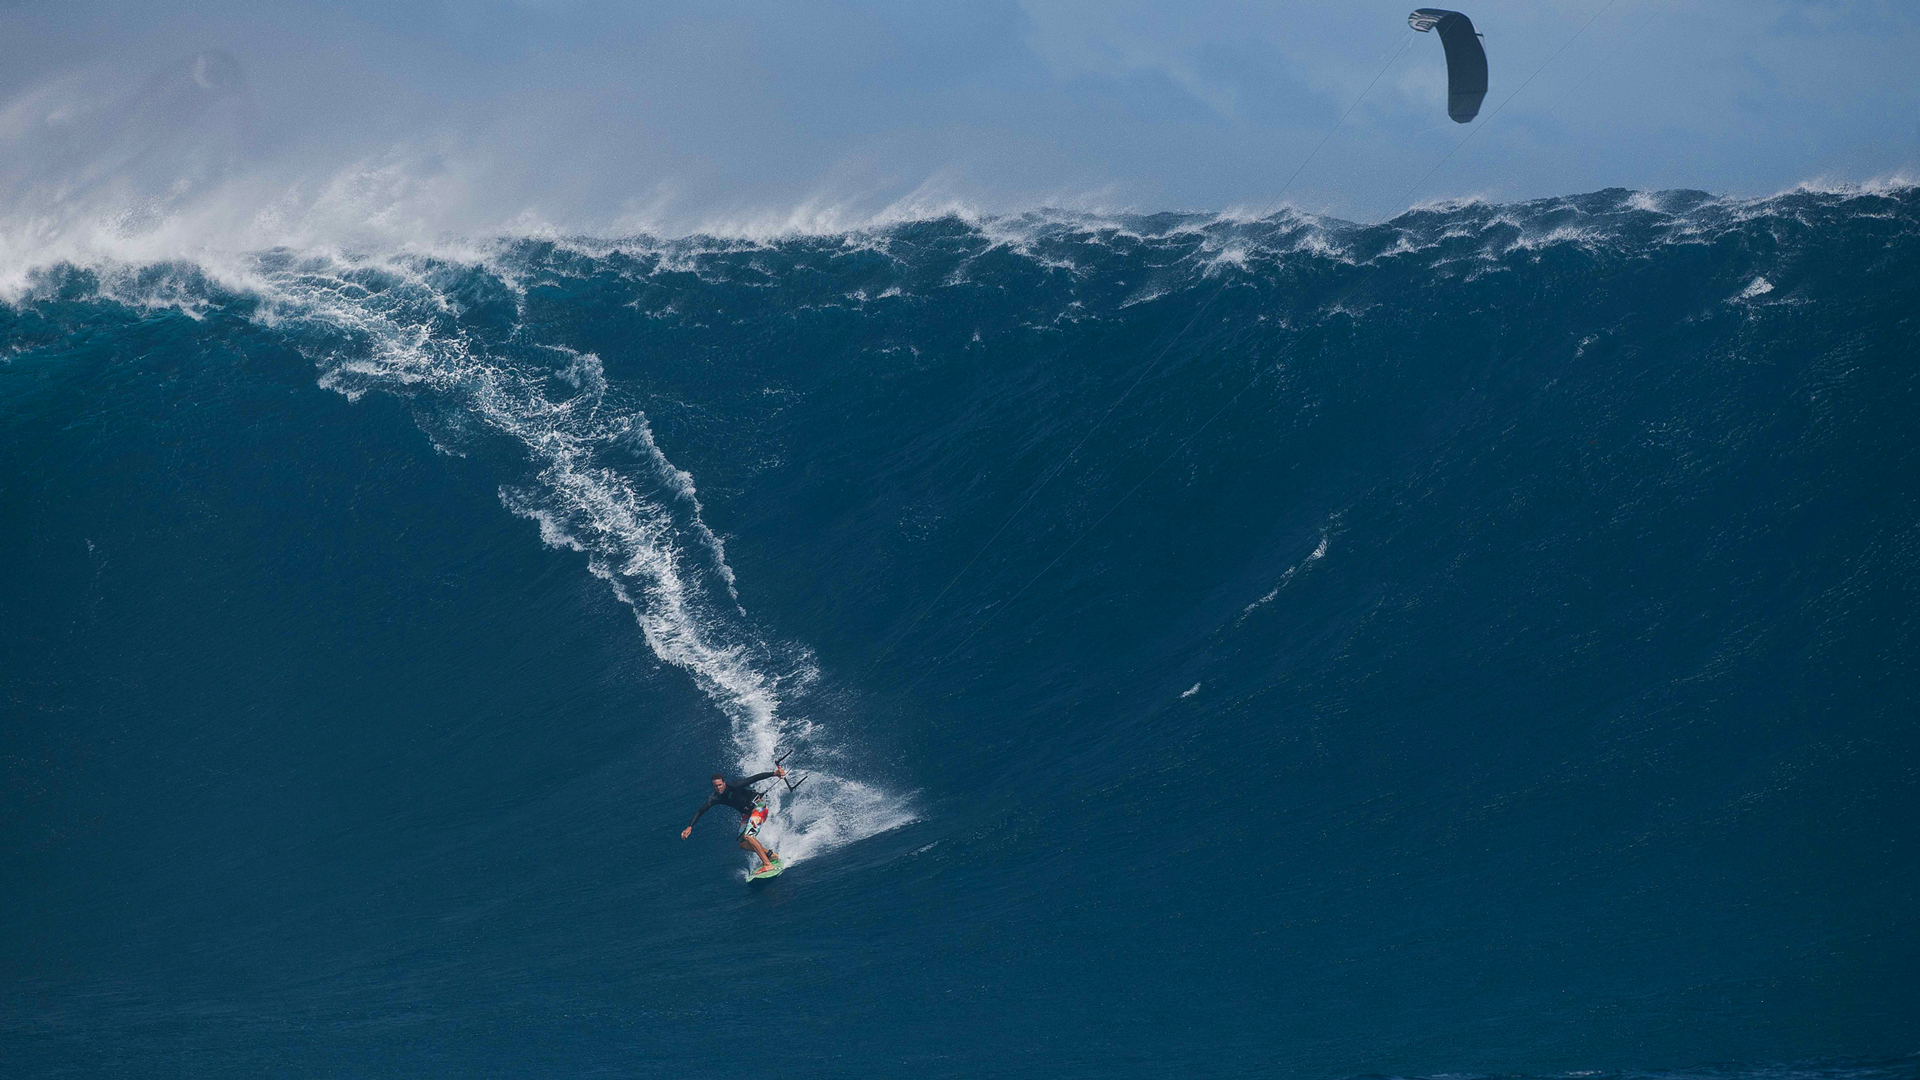 kitesurf wallpaper image - Ben Wilson on what must be the biggest wave ever kitesurfed - in resolution: High Definition - HD 16:9 1920 X 1080